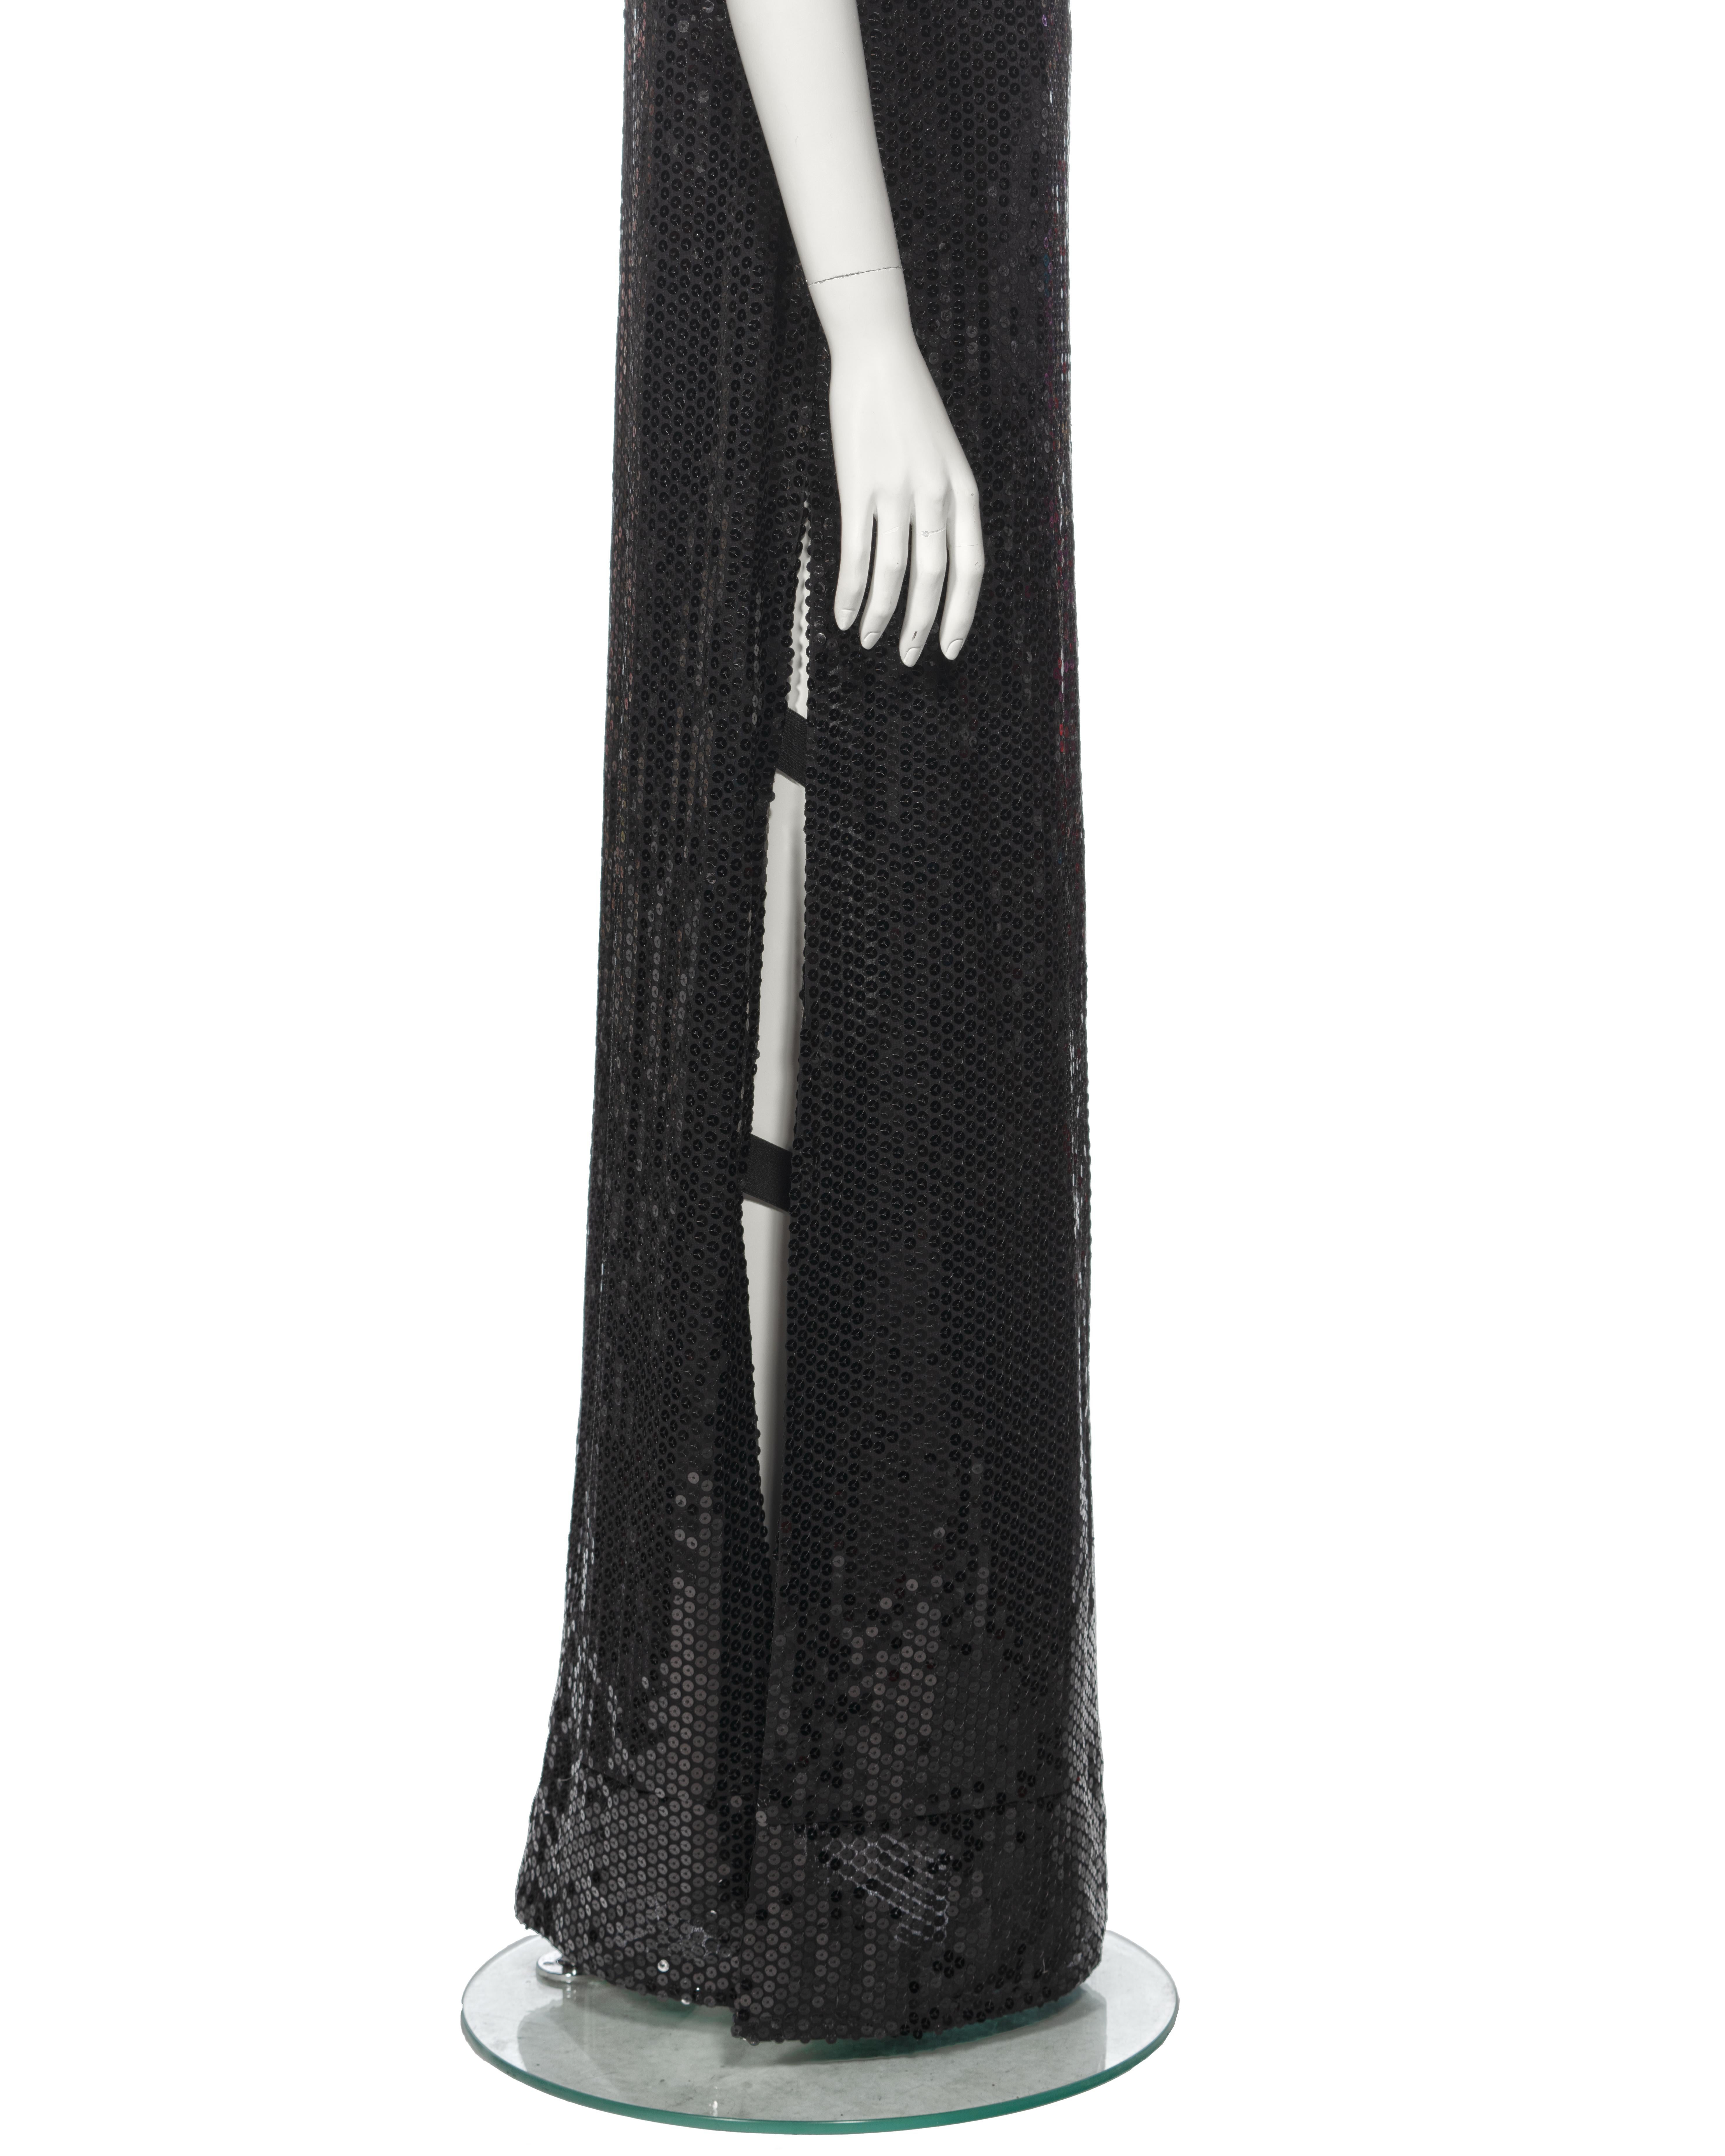 Helmut Lang Black Sequin Evening Dress With Armband, fw 1999 For Sale 7